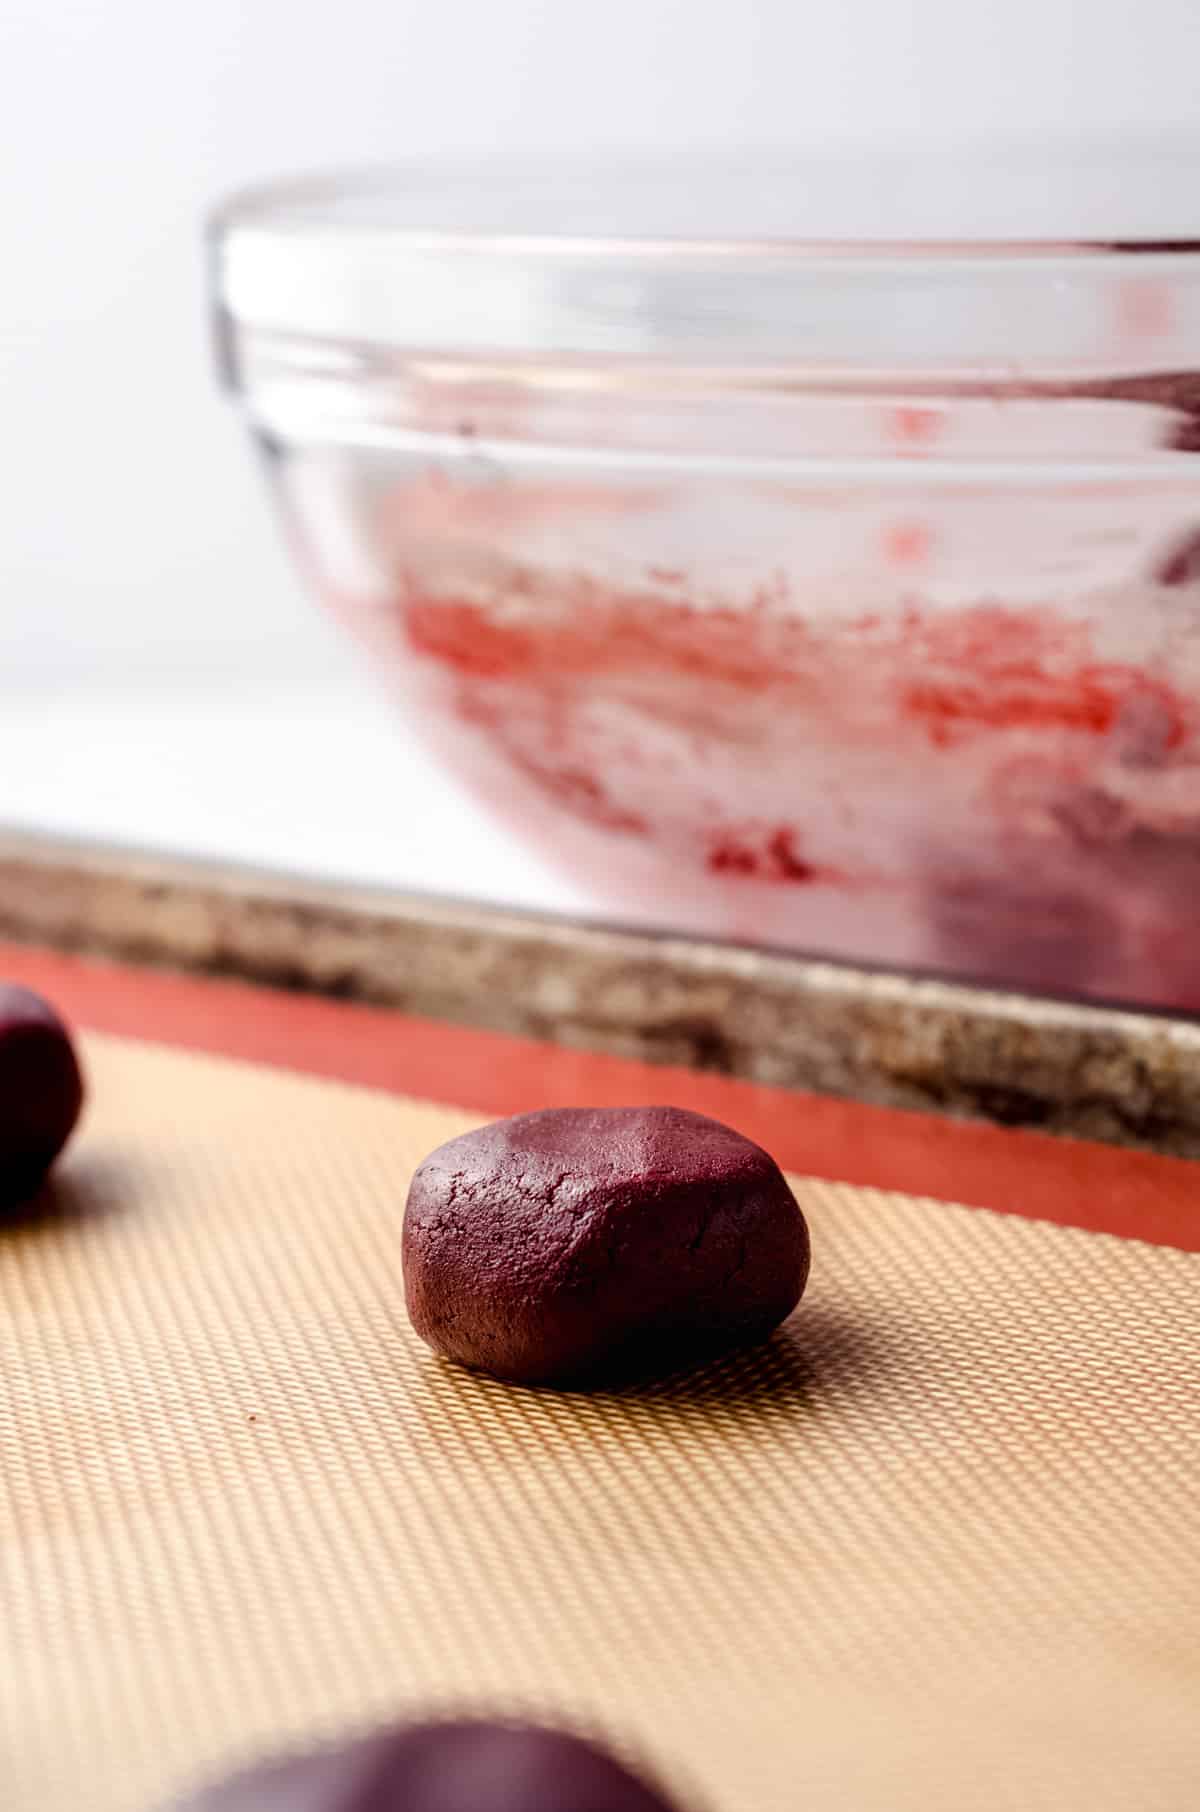 A ball of red velvet cookie dough is placed on a silicone mat in a baking tray. The ball of cookie dough is about the size of a golf ball. The glass bowl containing leftover dough is in the background.